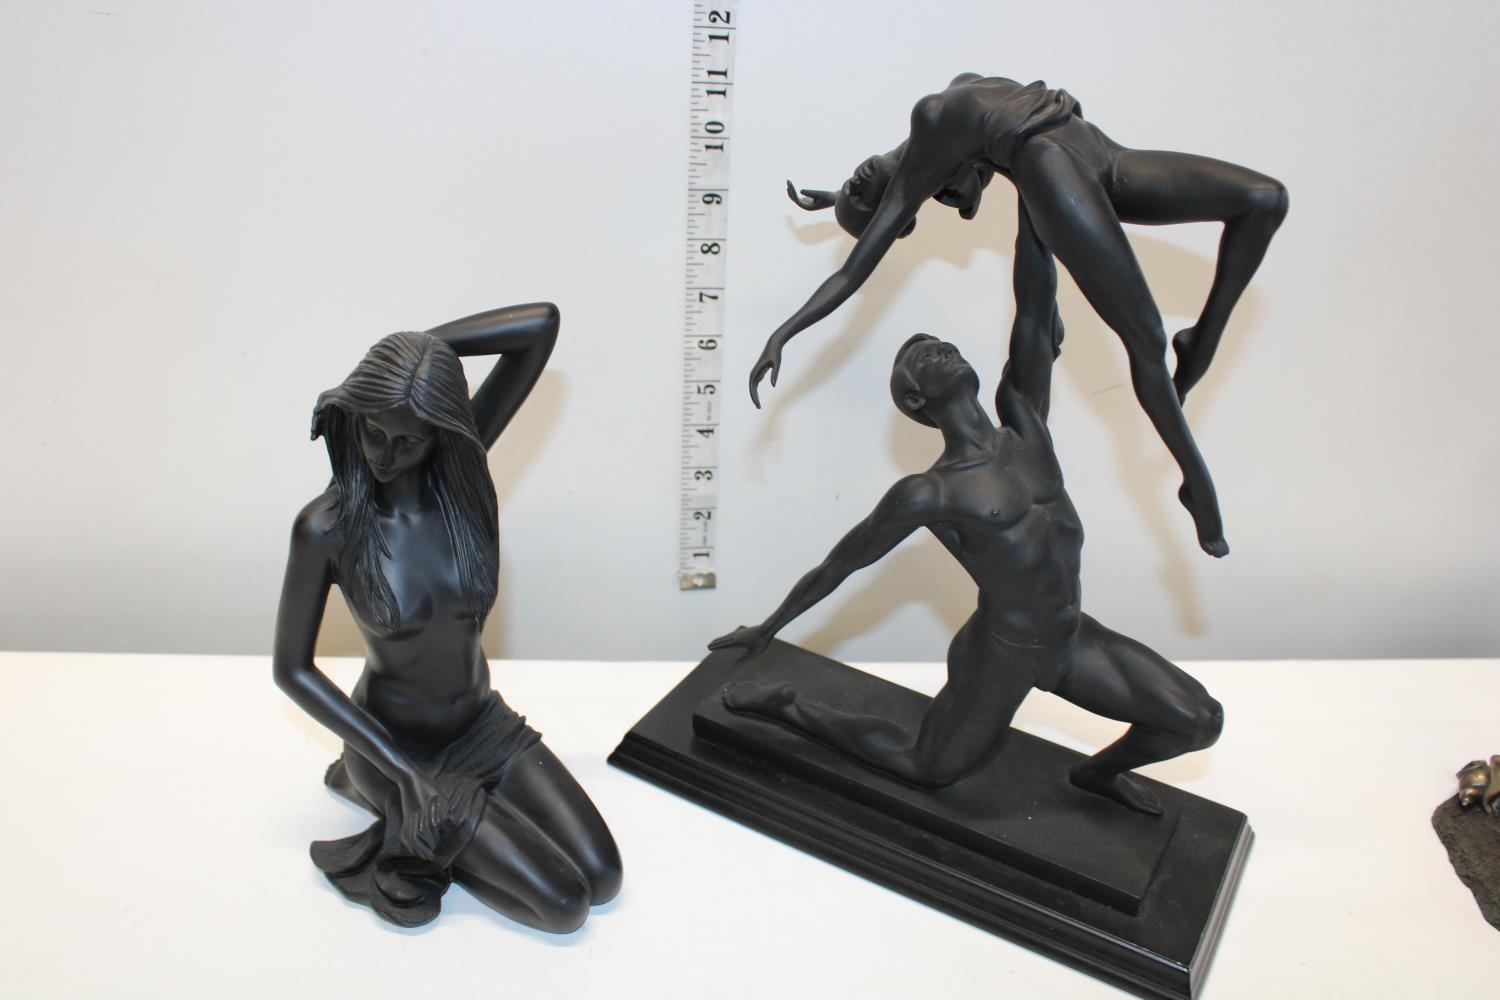 Two collectible figurines